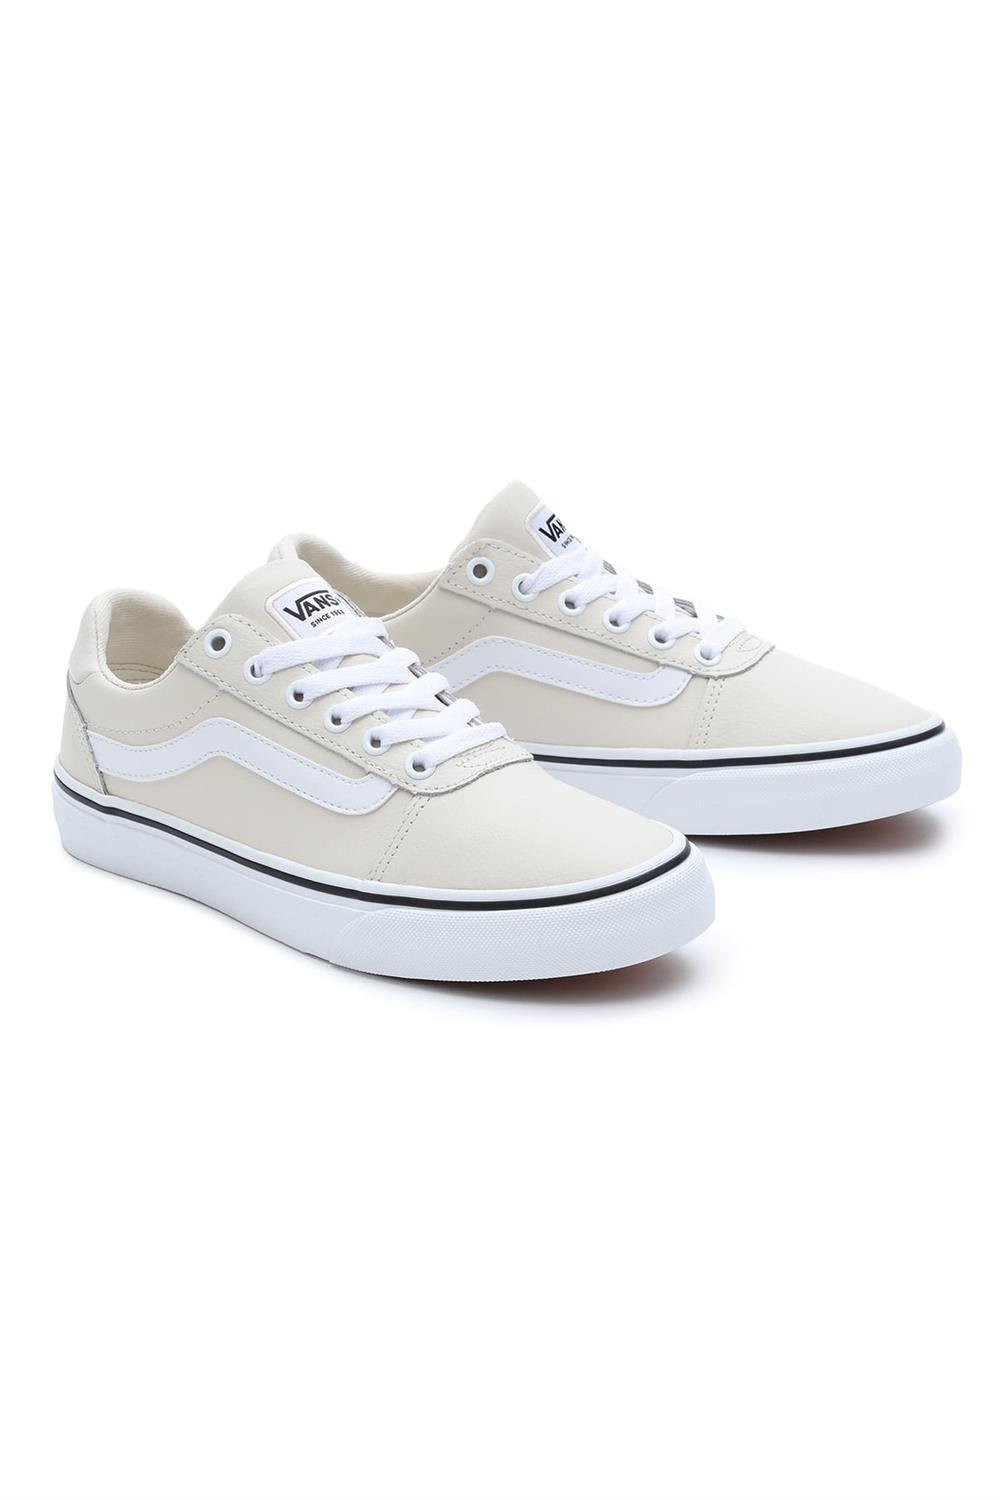 Ward Deluxe Birch Tumble Leather Trainers